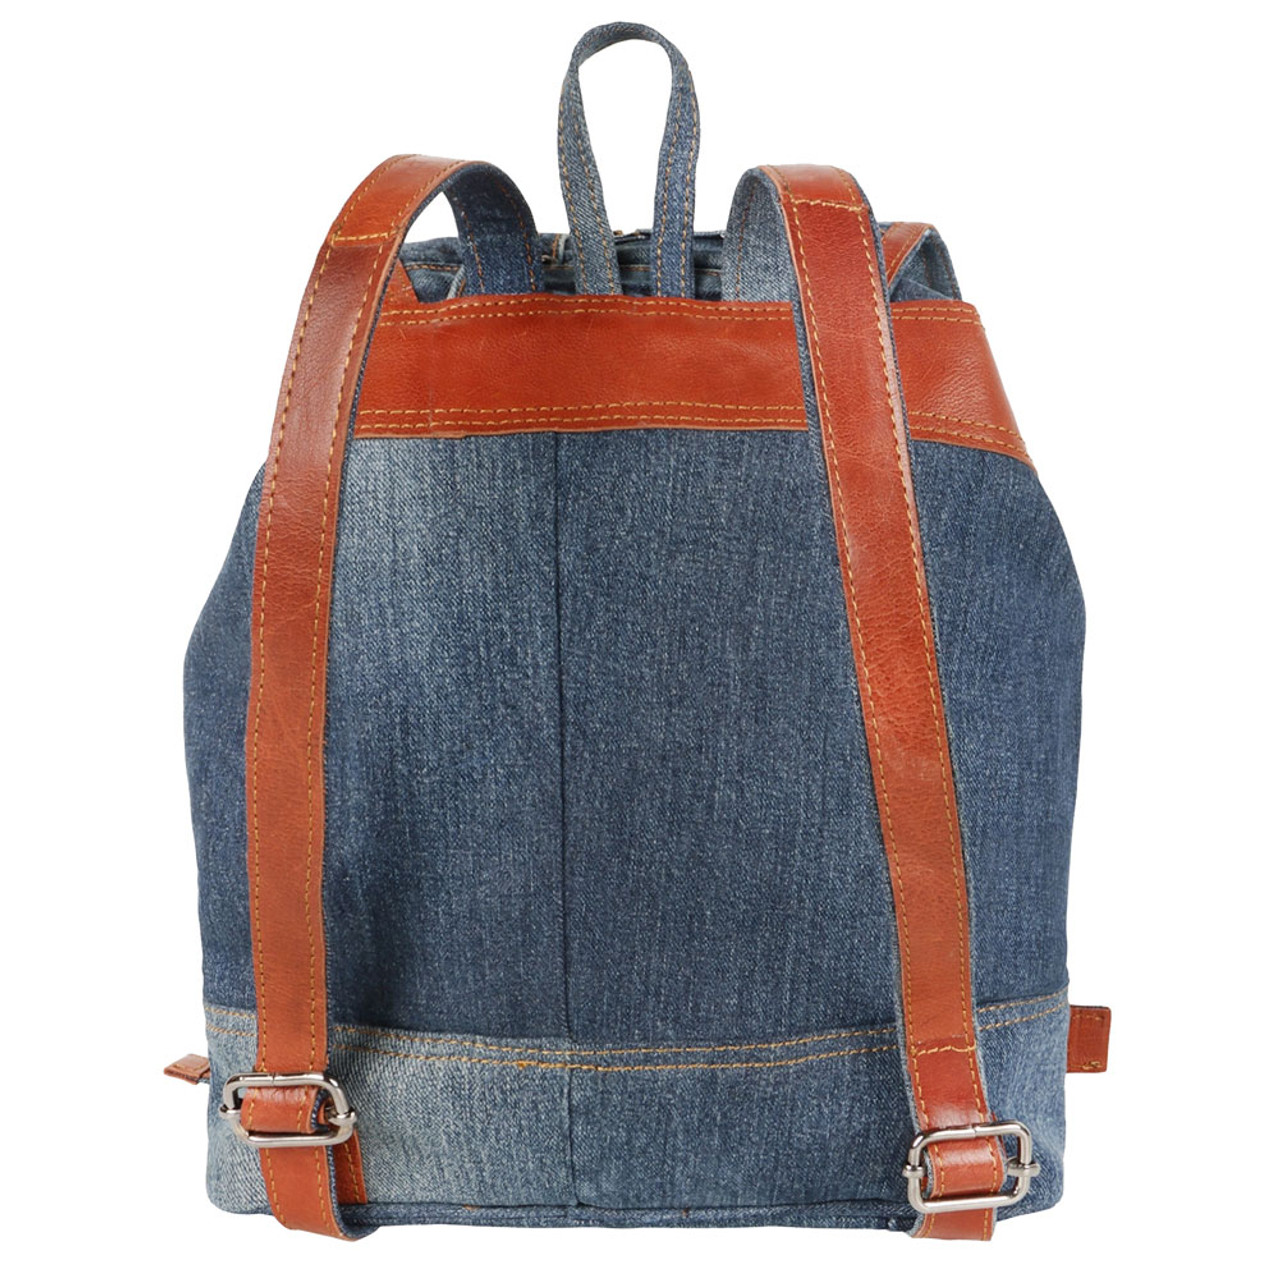 Upcycled Handcrafted Denim Jeans Mini Travel Backpack Bag